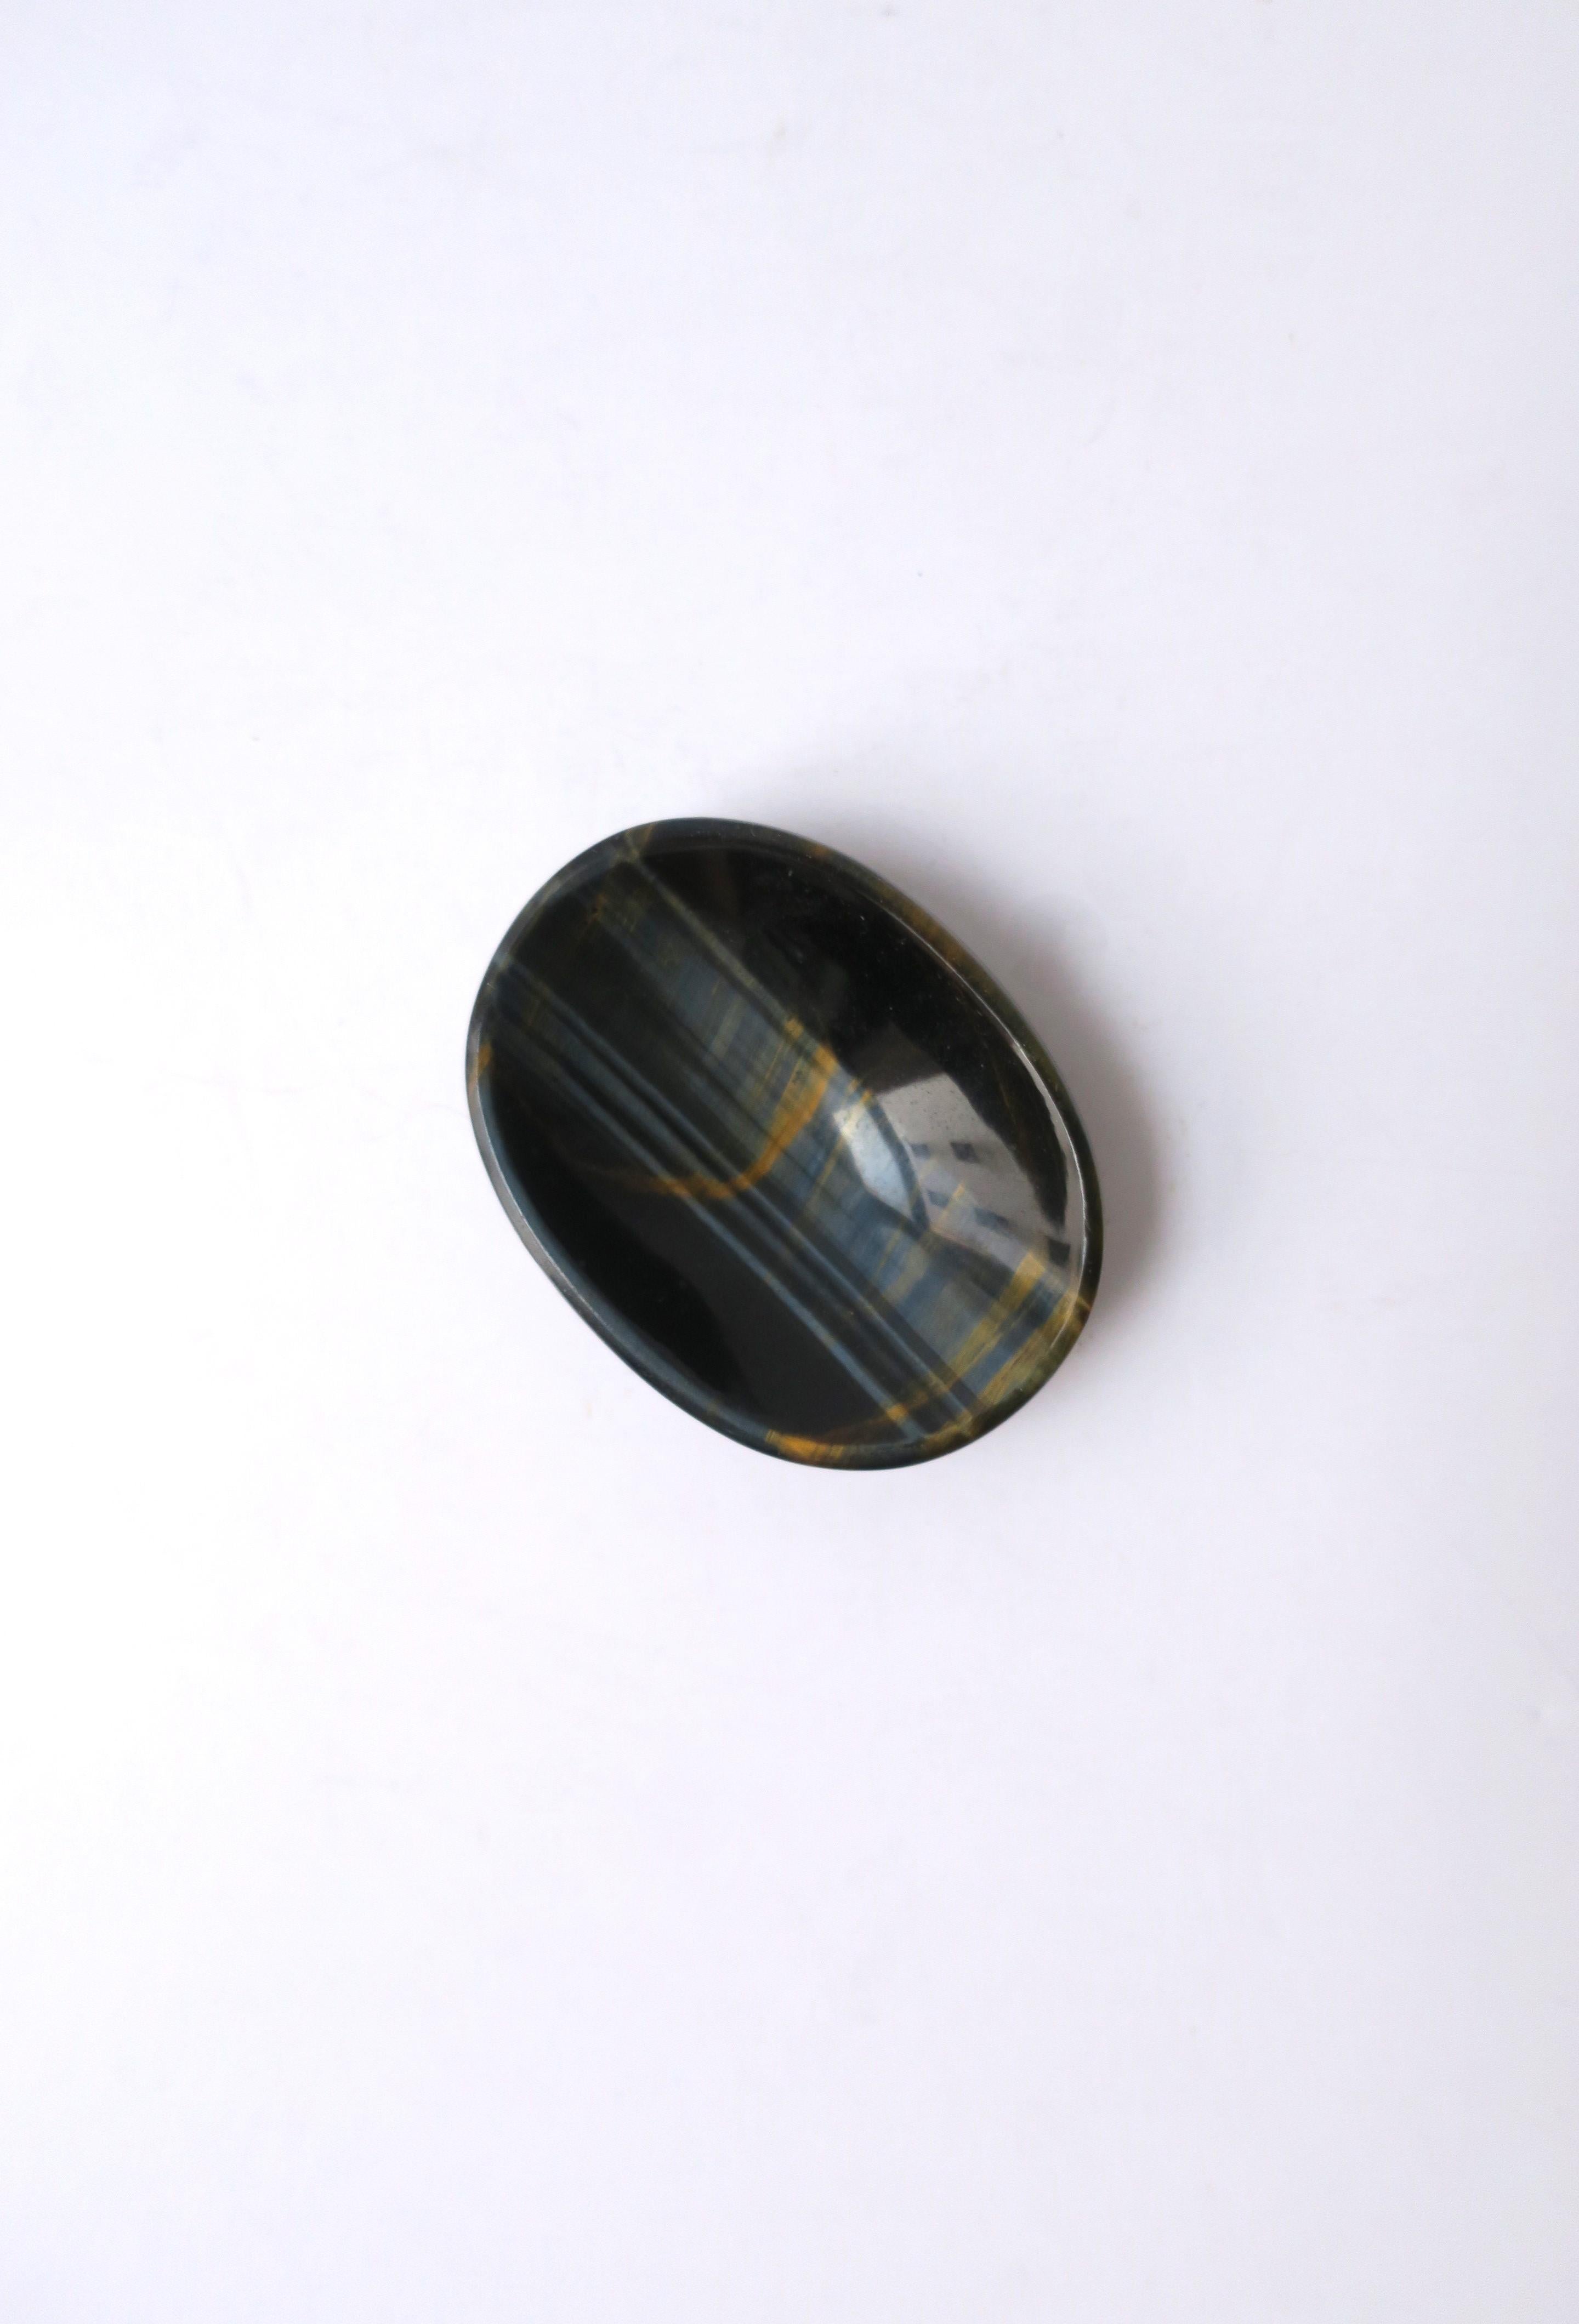 A small, oval, polished agate stone dish in a rich dark blue and gold/copper hues, in the Modern/Minimalist styles. Shown holding earrings. A beautiful piece for small items such as earrings, cufflinks, a ring, pills, etc. Excellent condition.